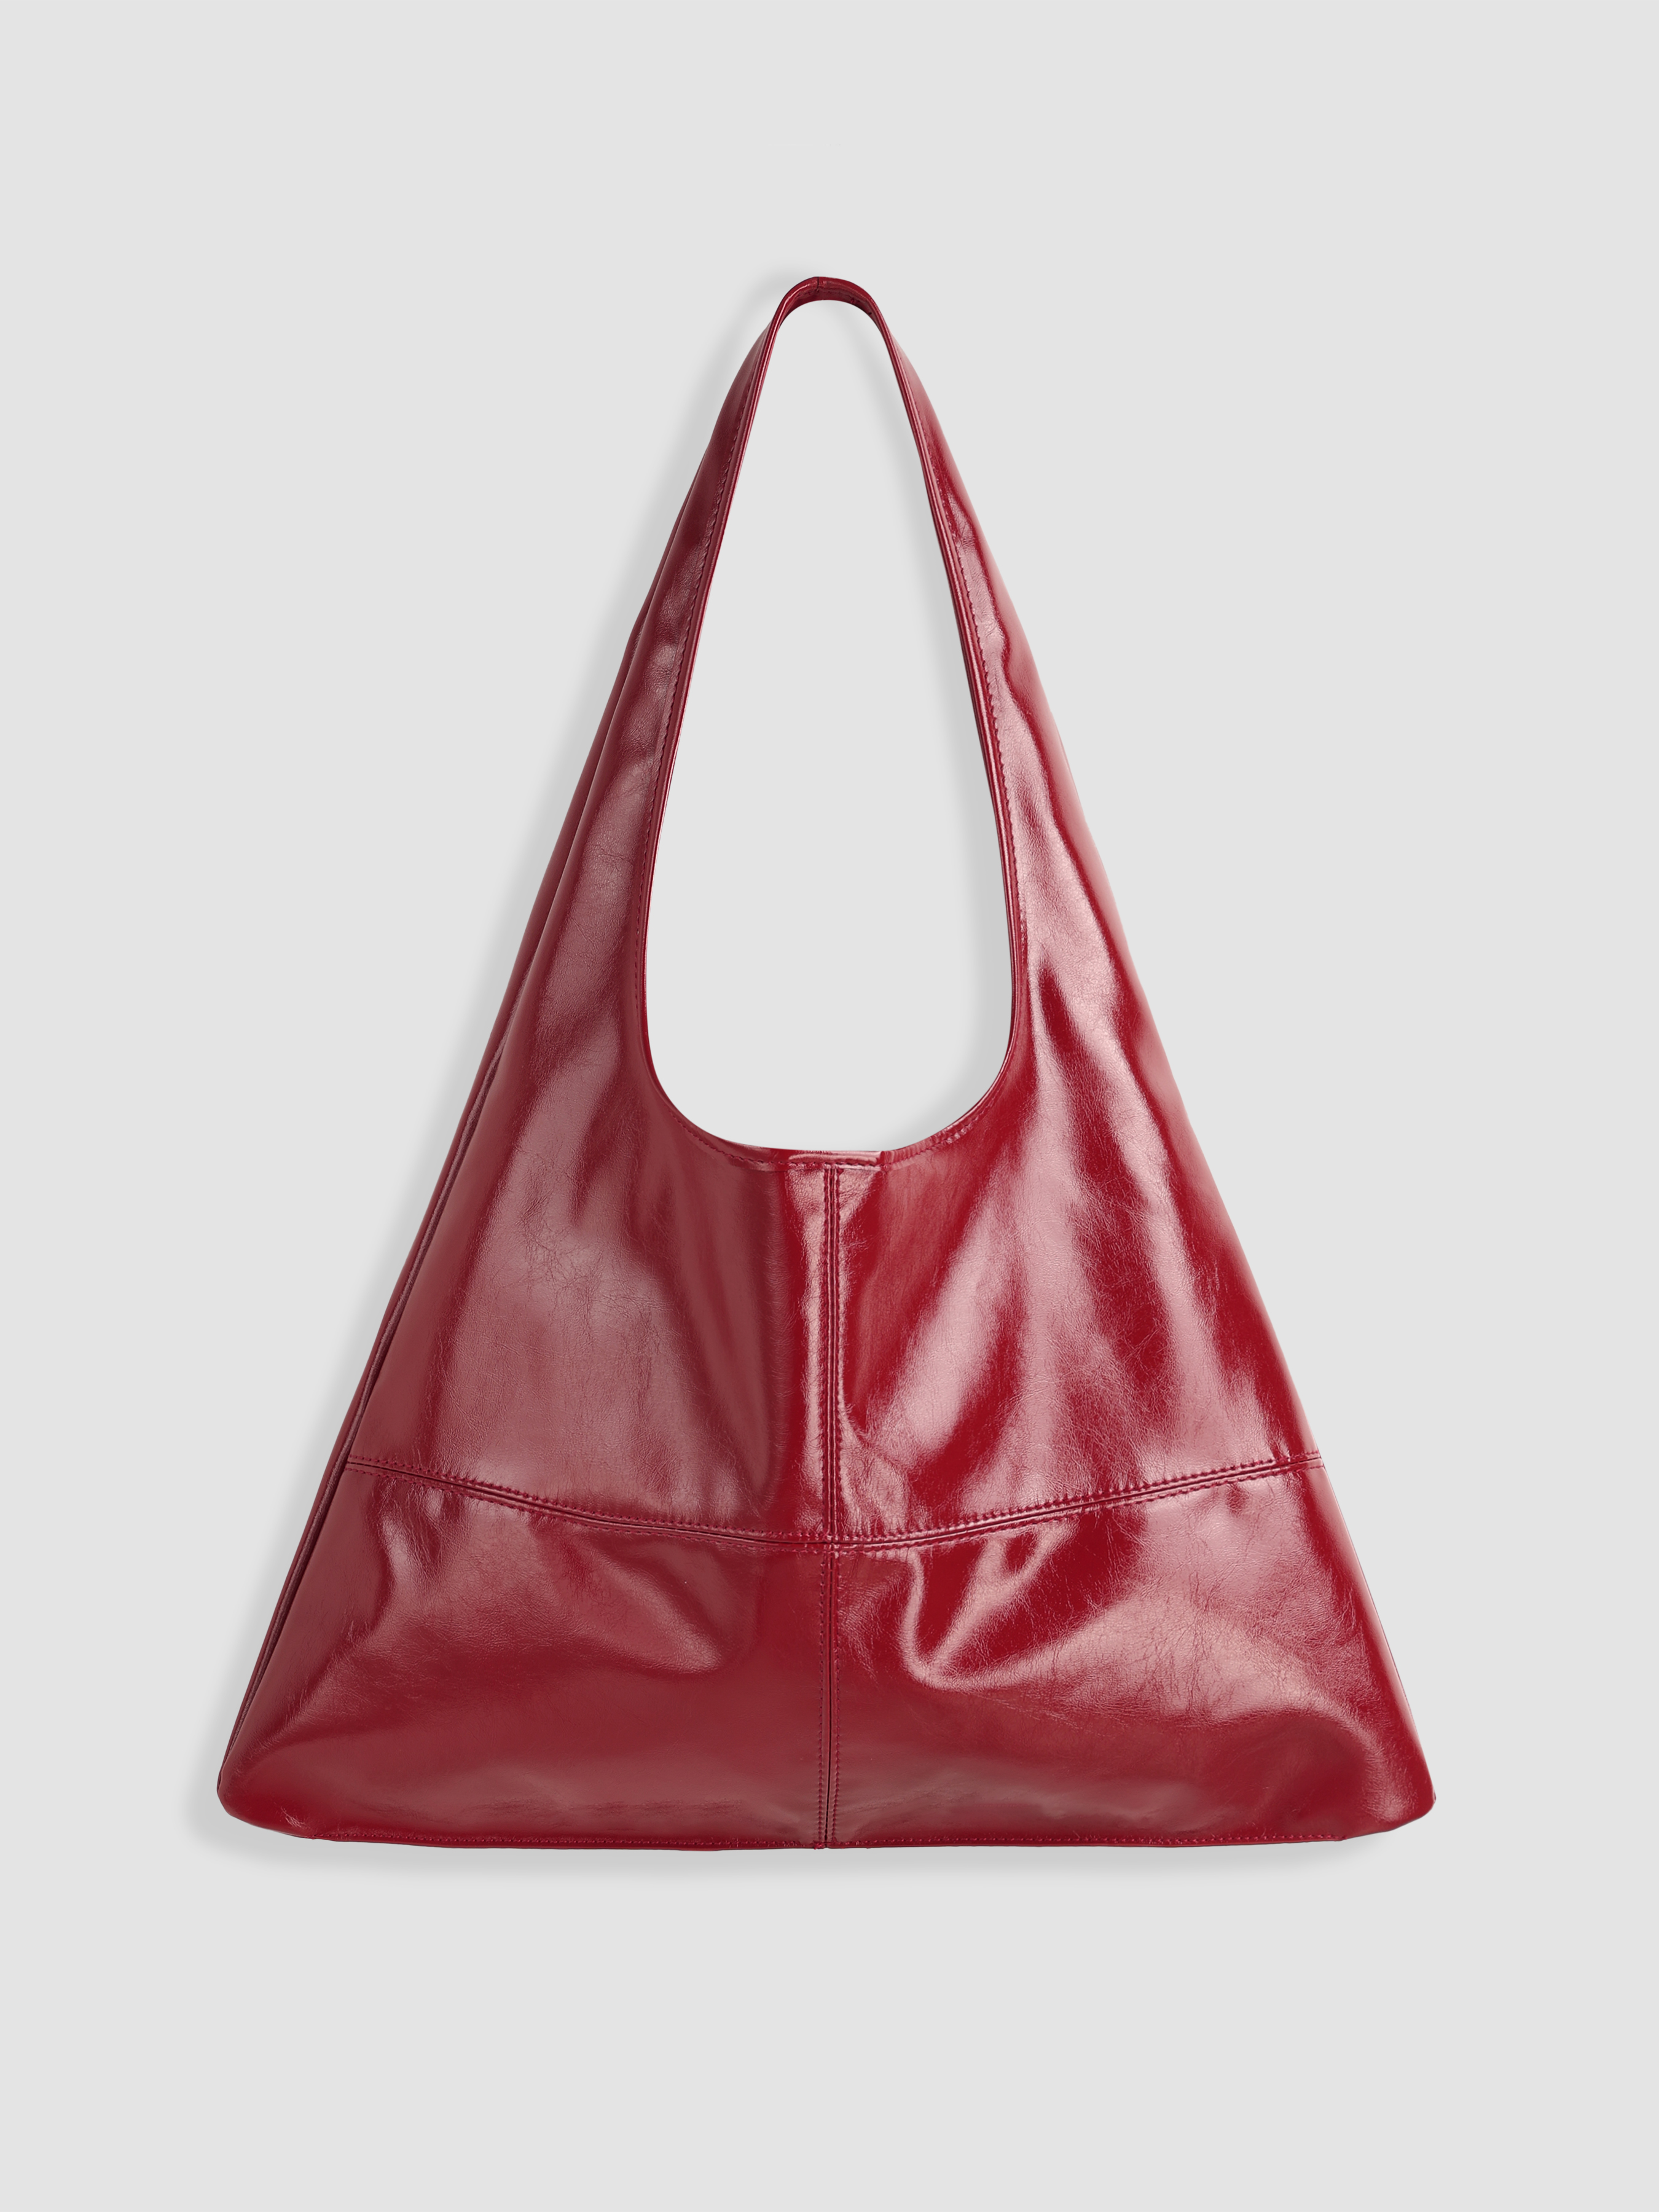 Tote bag edgy et angulaire